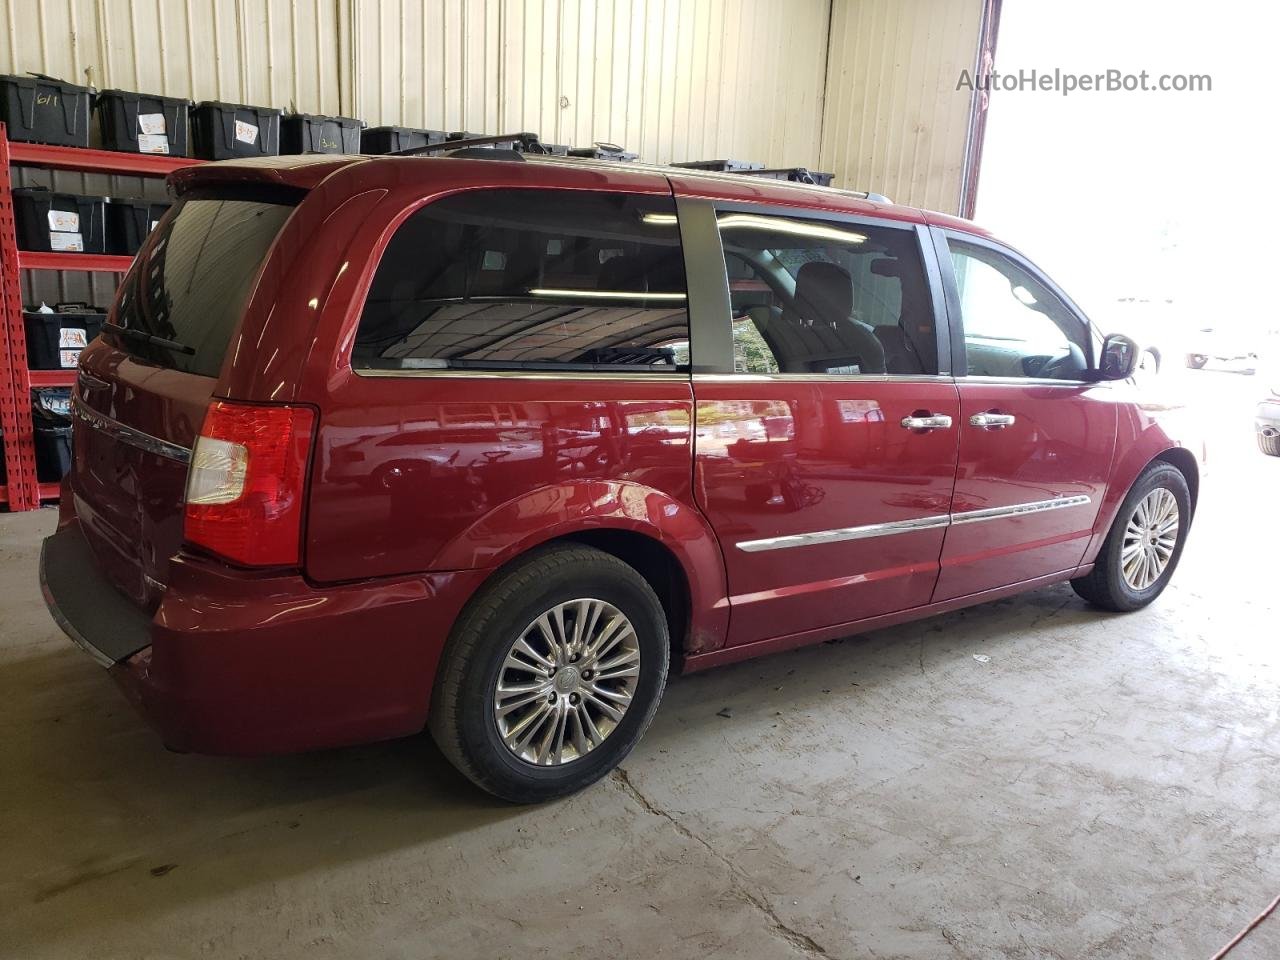 2011 Chrysler Town & Country Limited Бордовый vin: 2A4RR6DG4BR615483